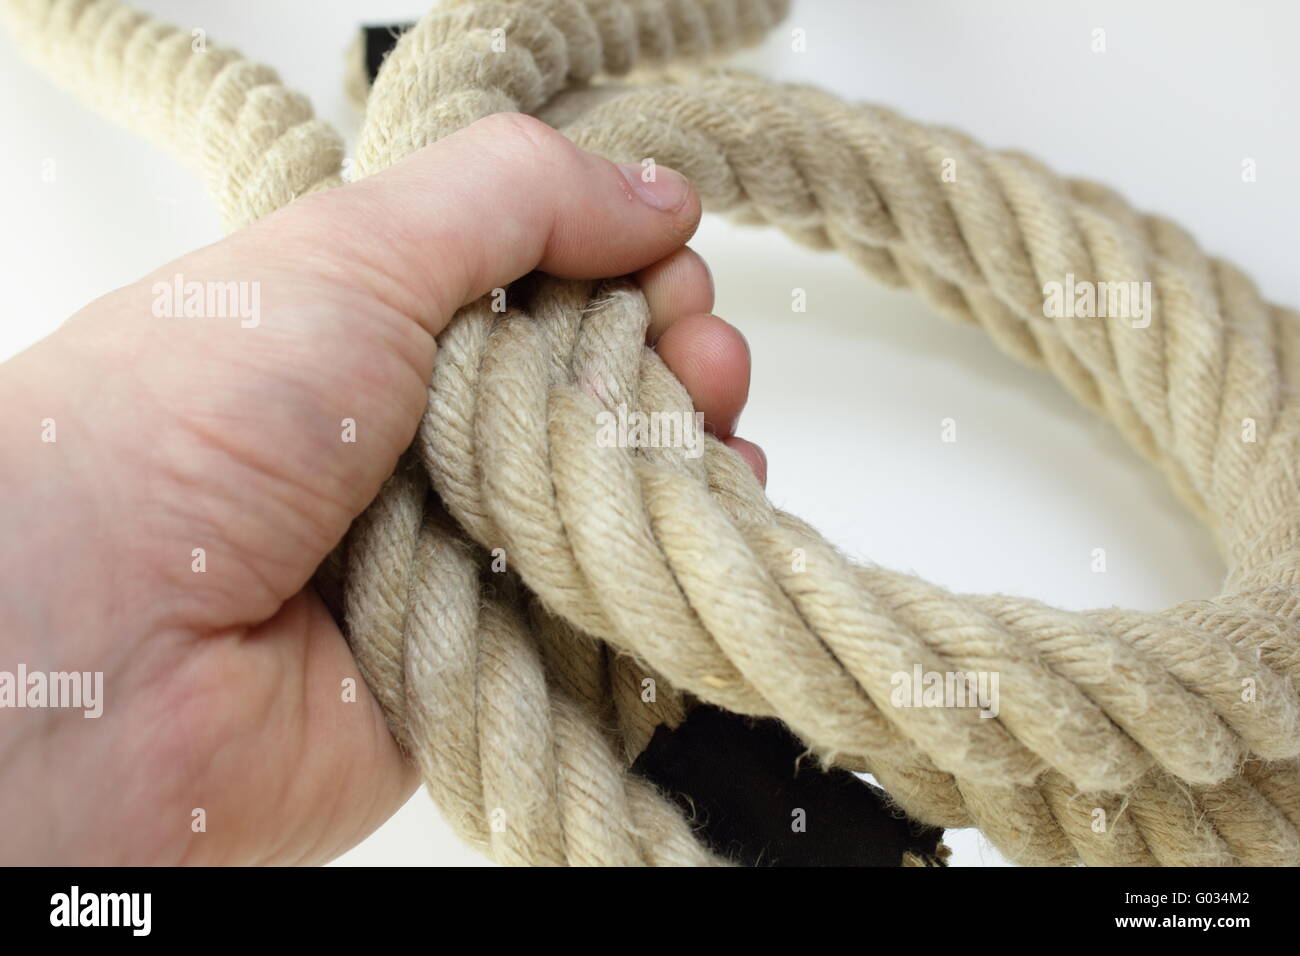 rope on hand Stock Photo